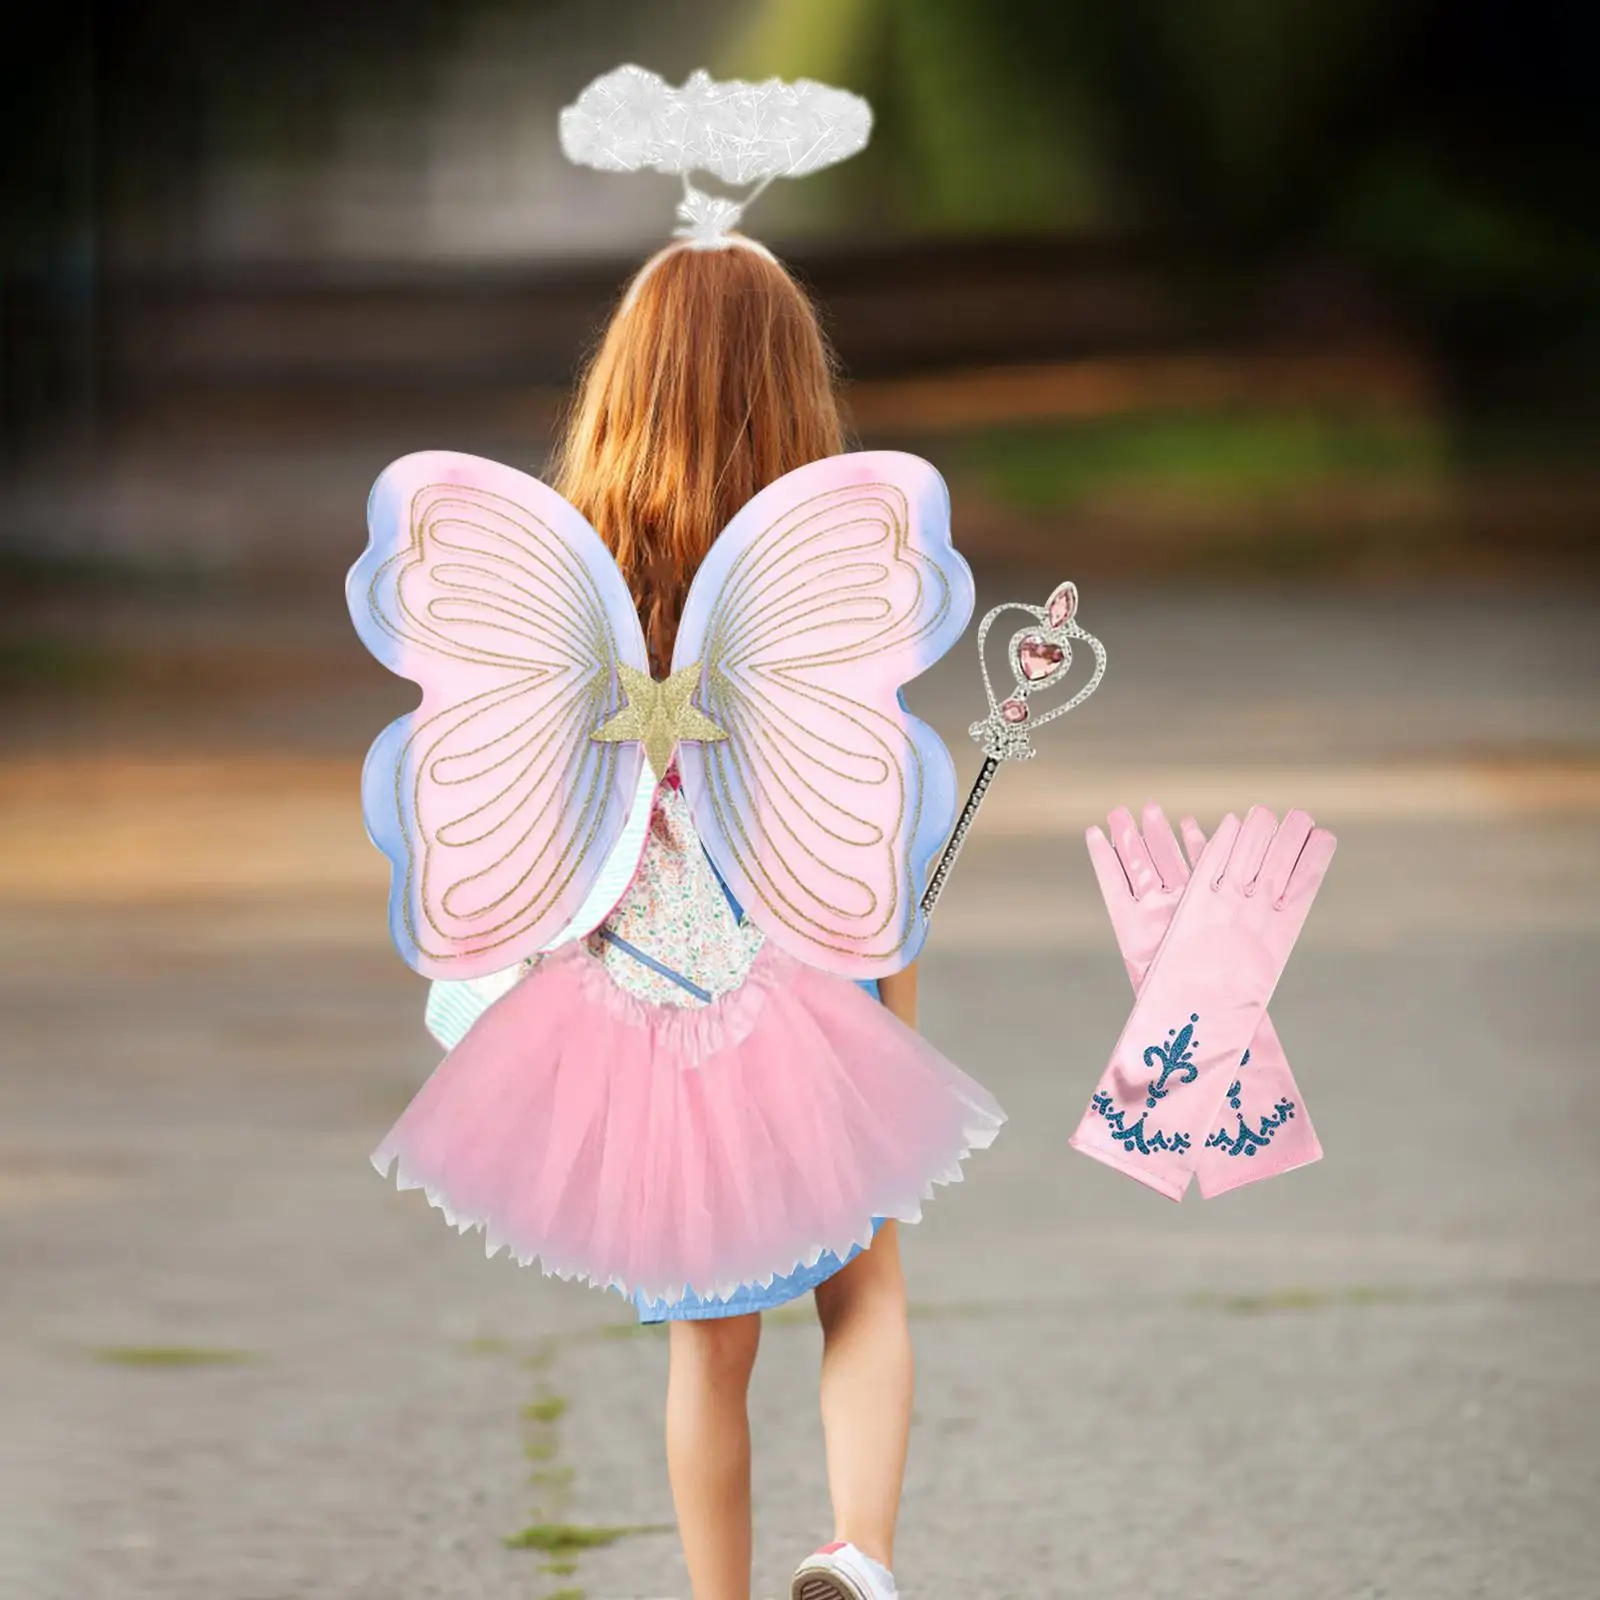 Fairy Butterfly Costume Set Headband Butterfly Wings Wand for Pretended Play Birthday Party Halloween Festival Photo Props